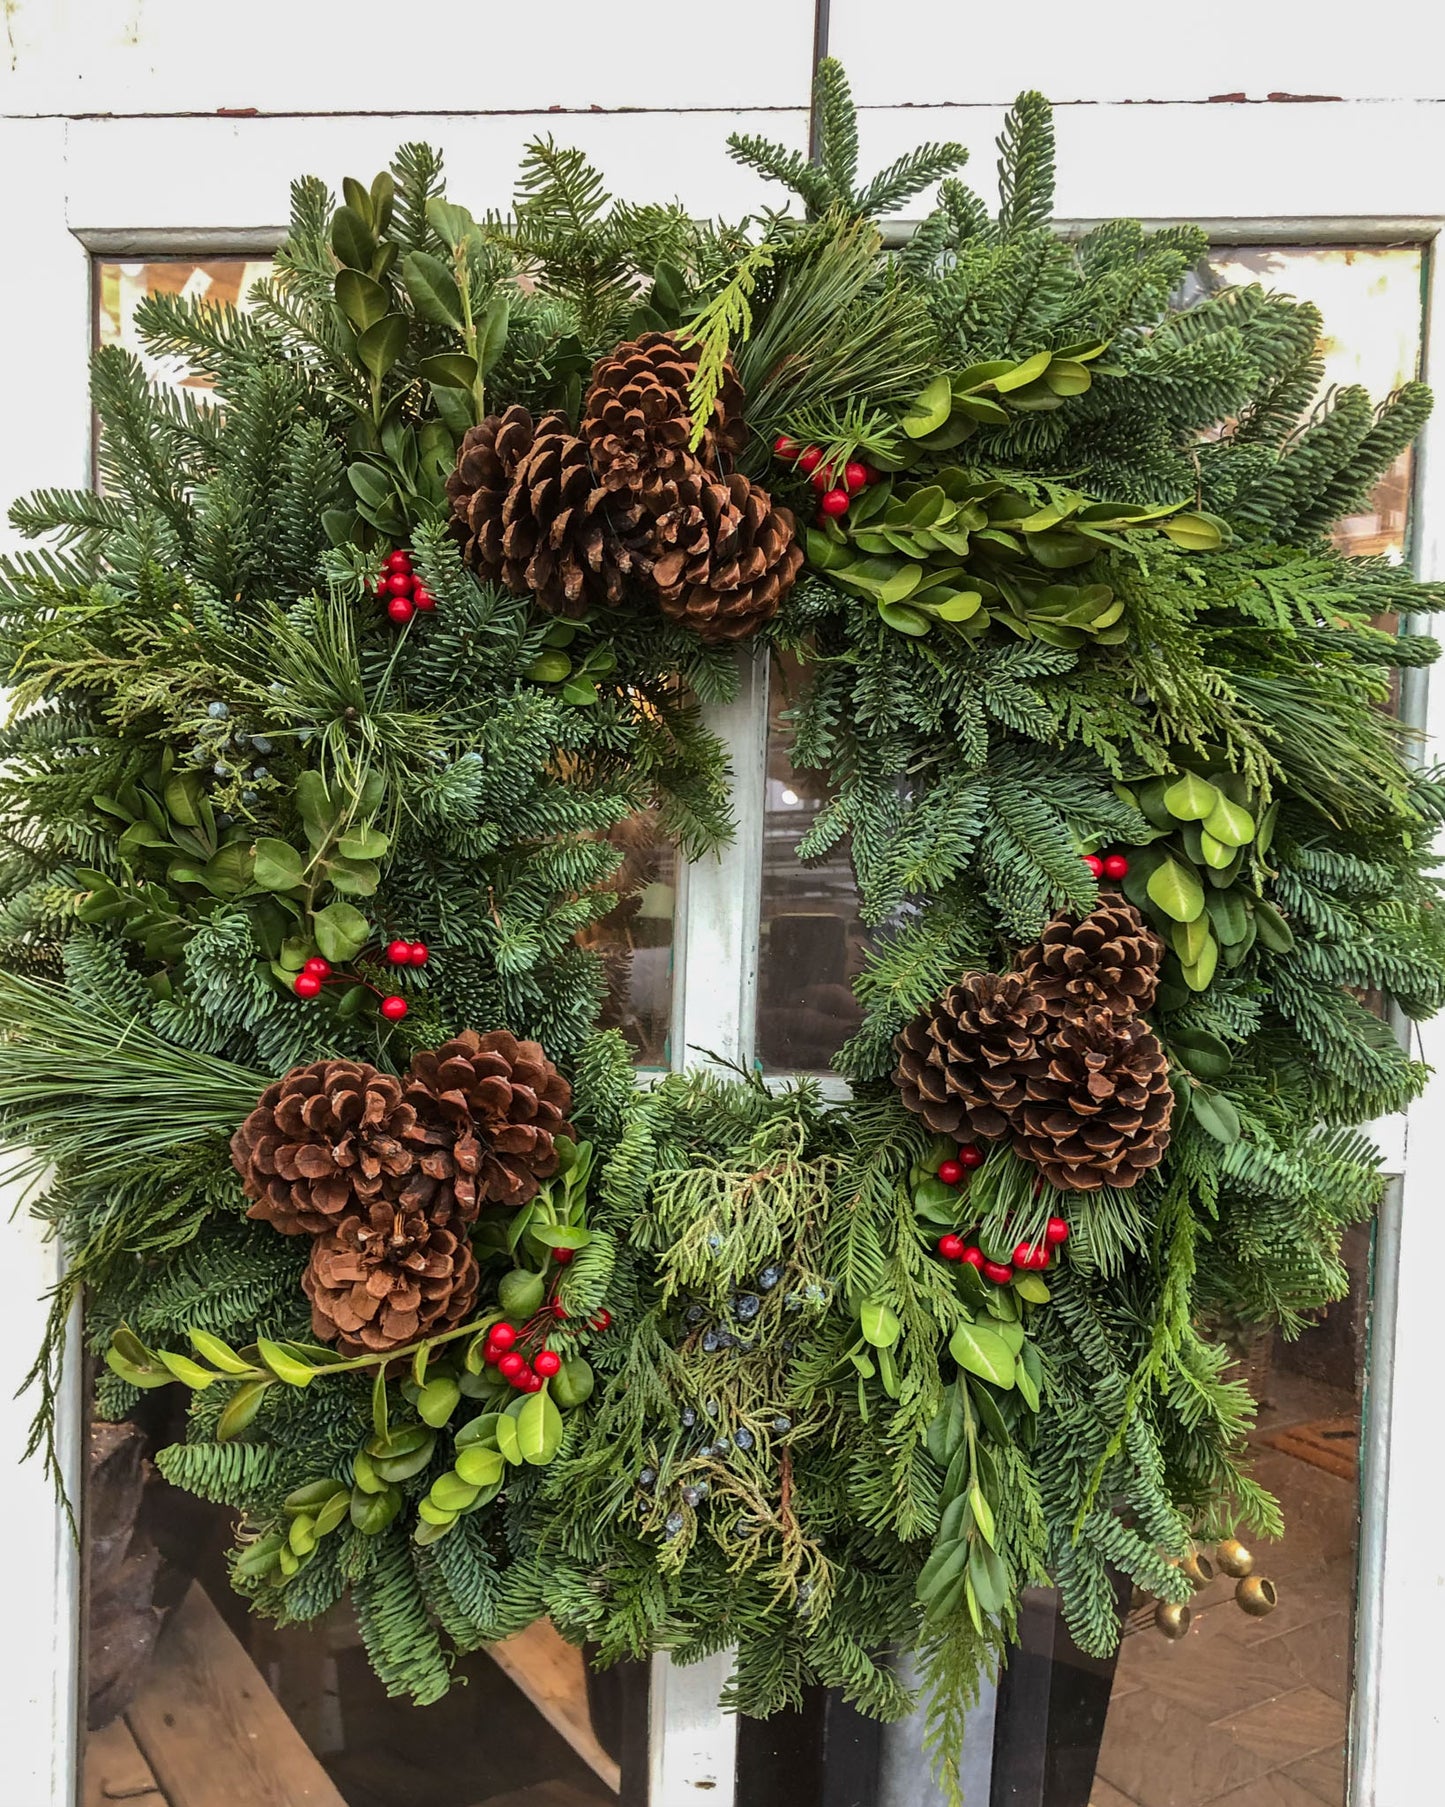 "Home for the Holidays" Winter Wreath